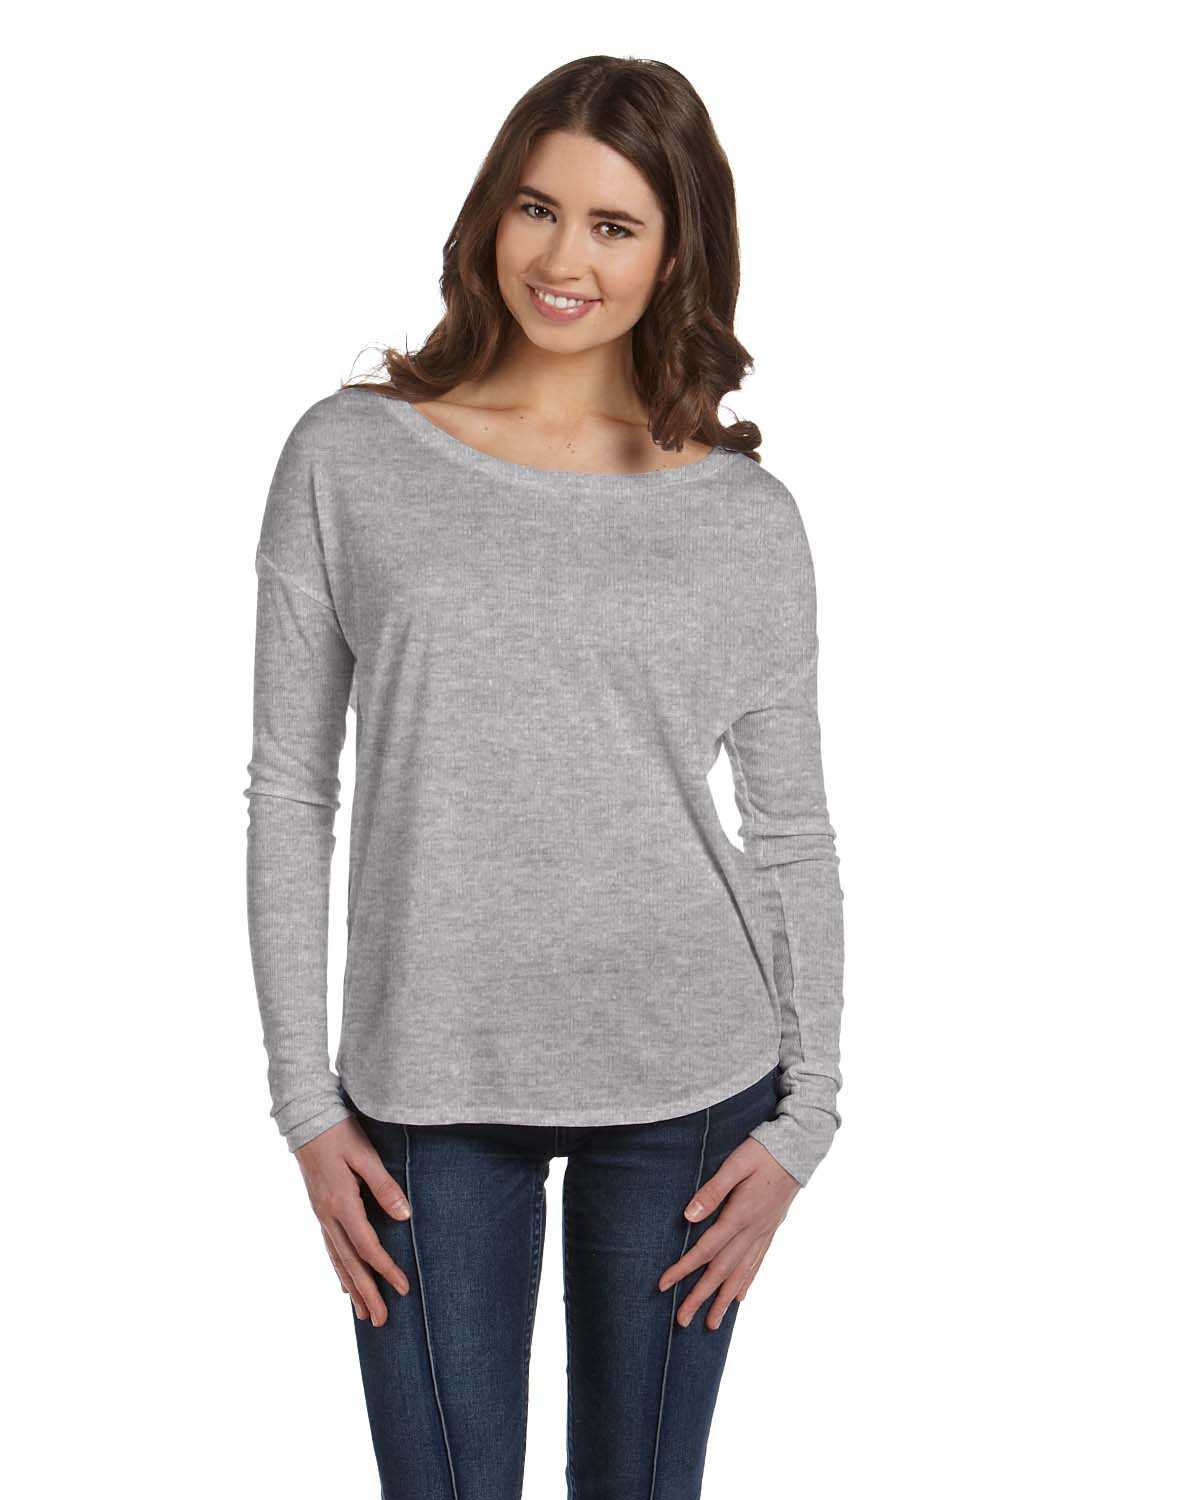 Bella + Canvas 8852 Ladies' Flowy Long-Sleeve T-Shirt with 2x1 Sleeves ...